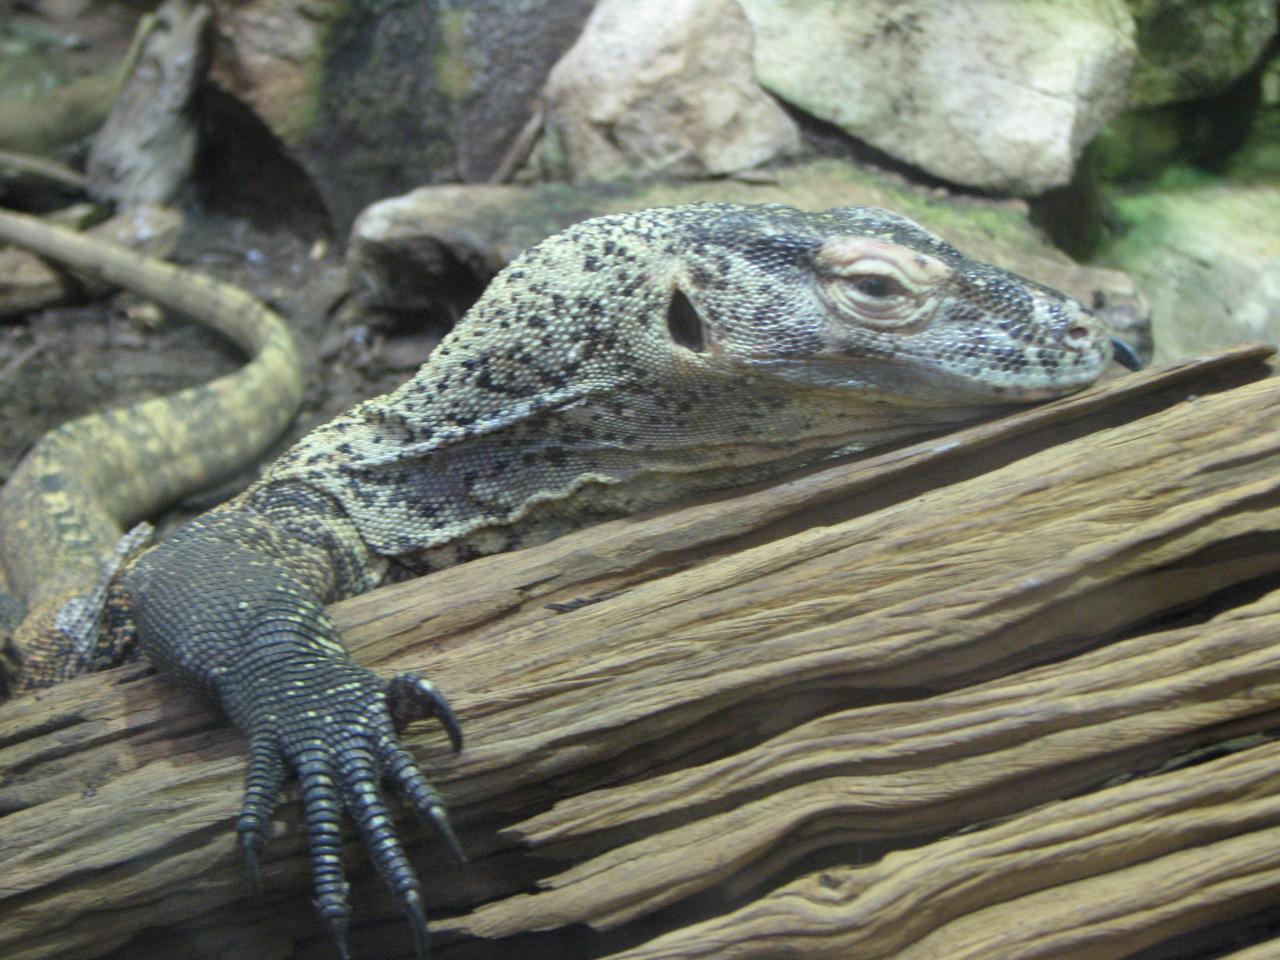 an adult lizard in a zoo setting looks on